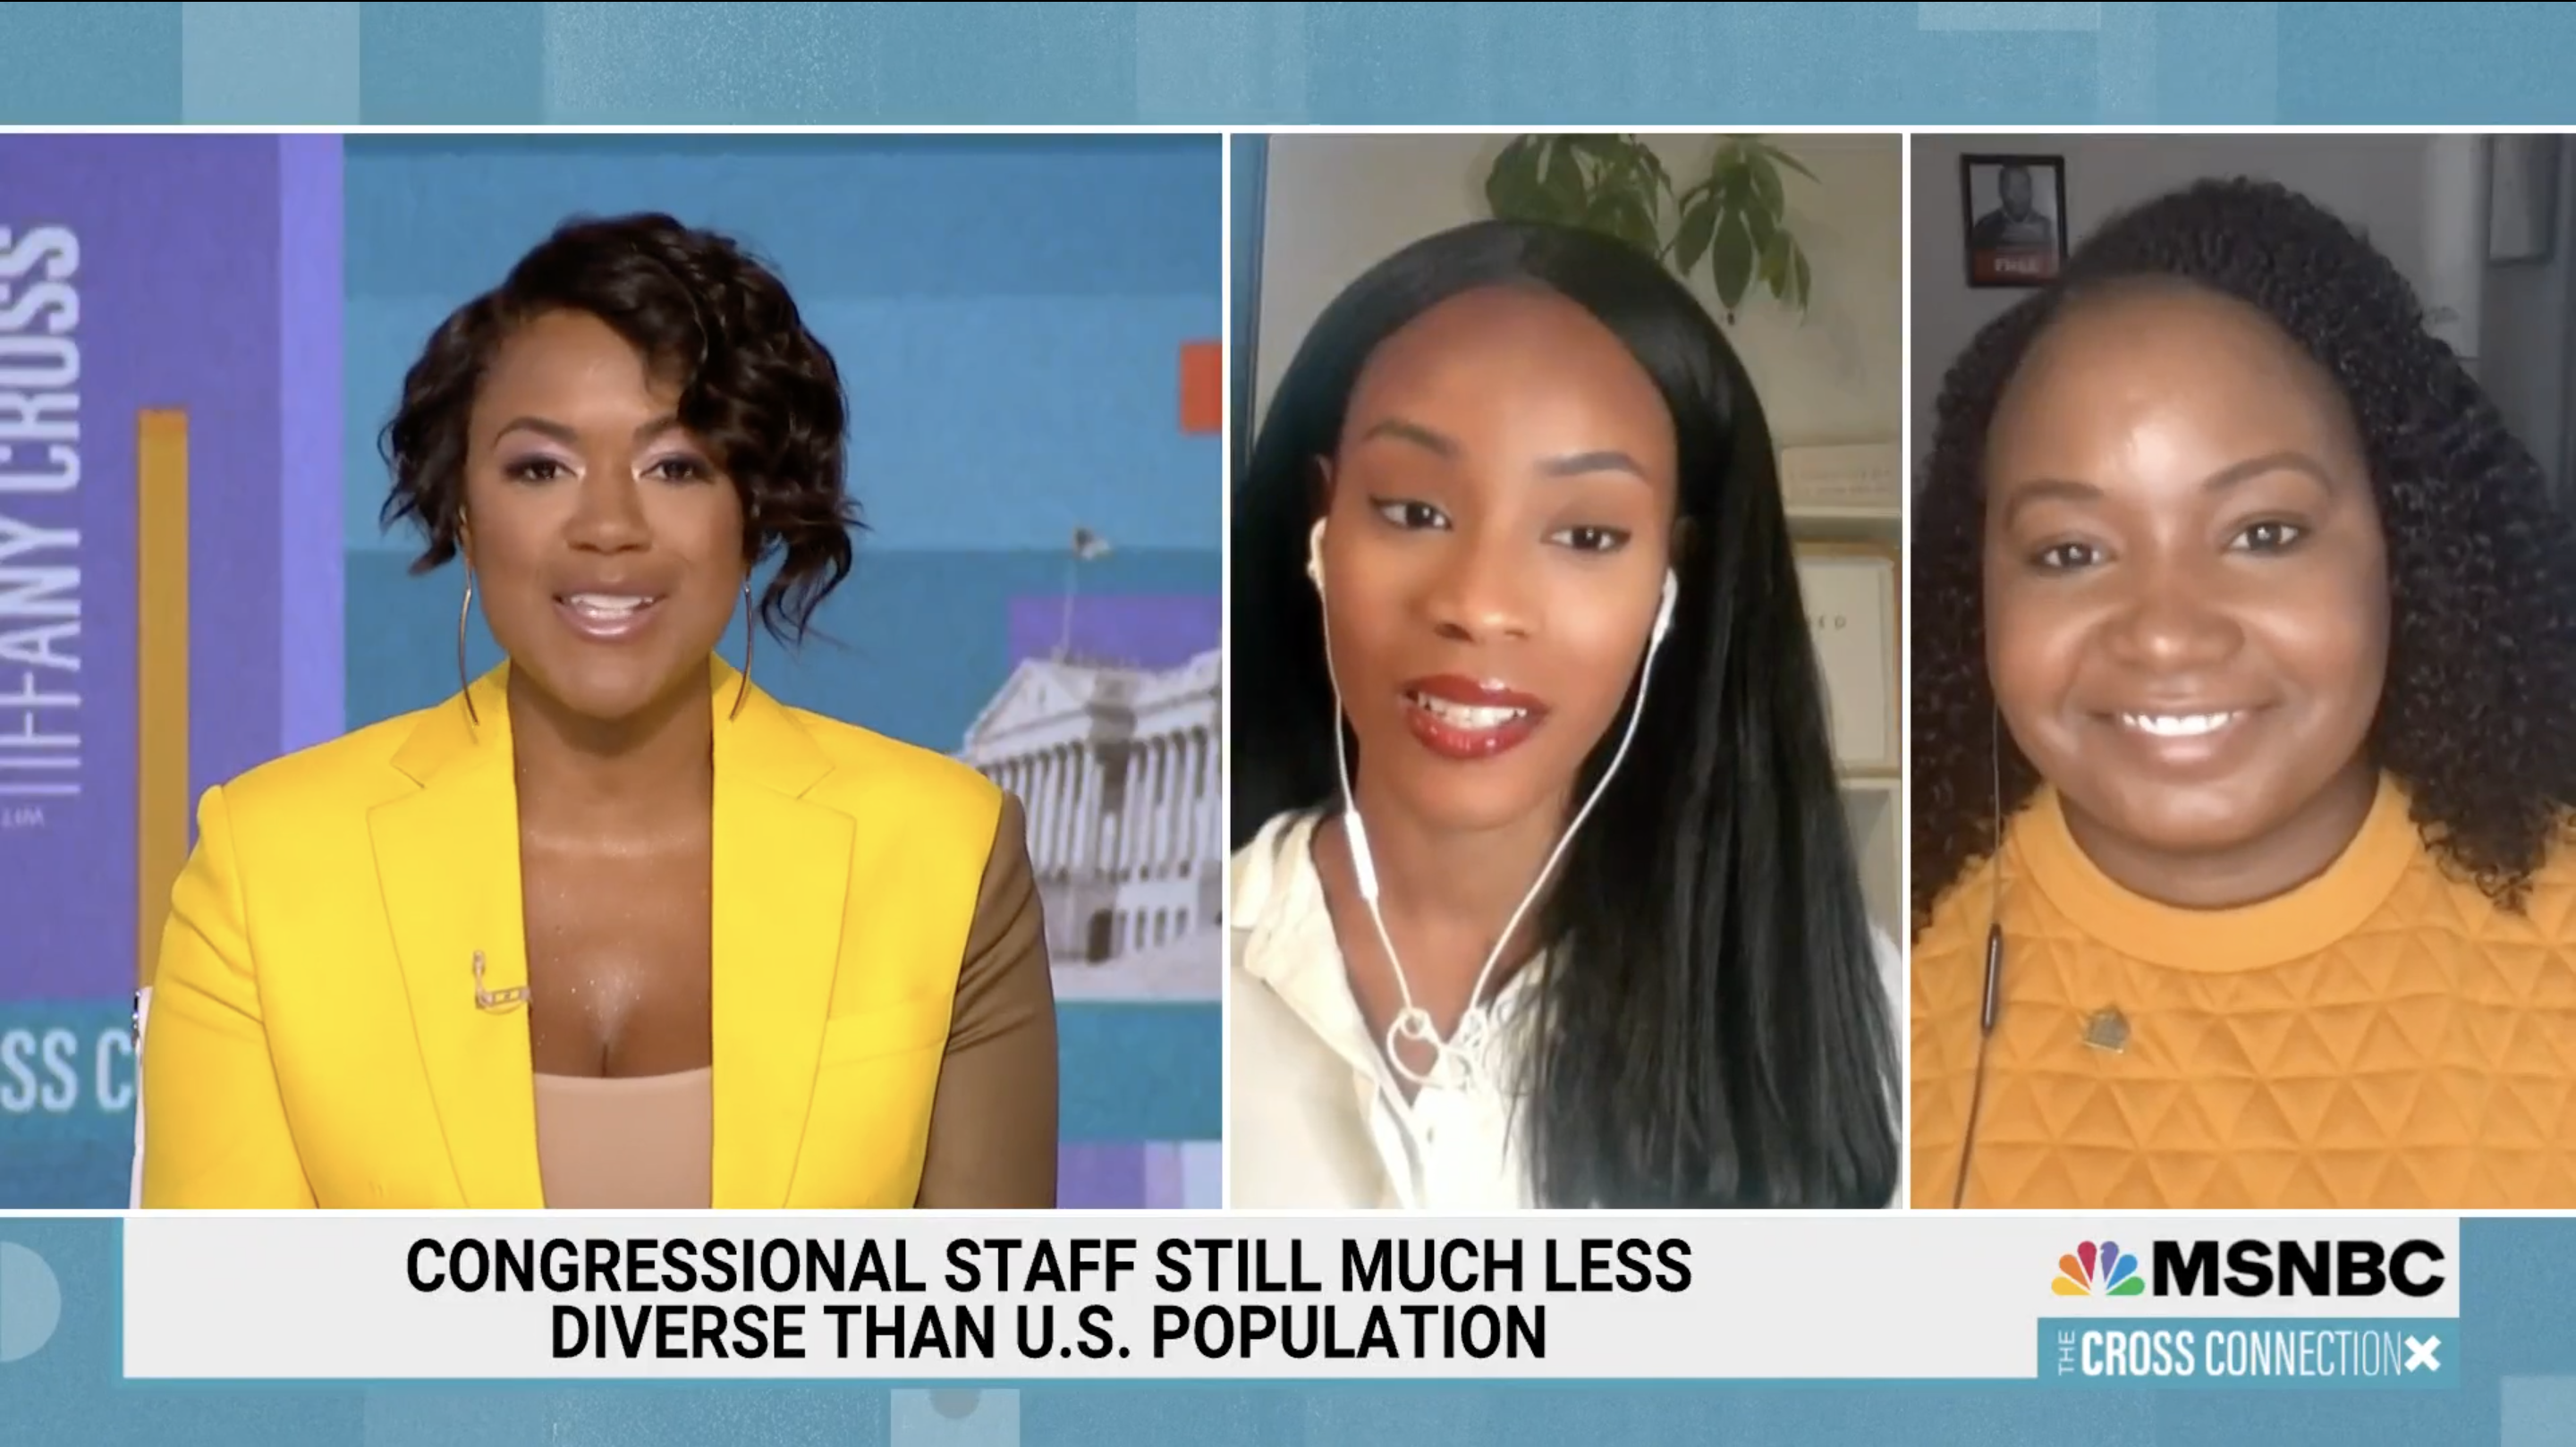 MSNBC Cross Connection with Tiffany Cross, Herline Mathieu and Dr. LaShonda Brenson